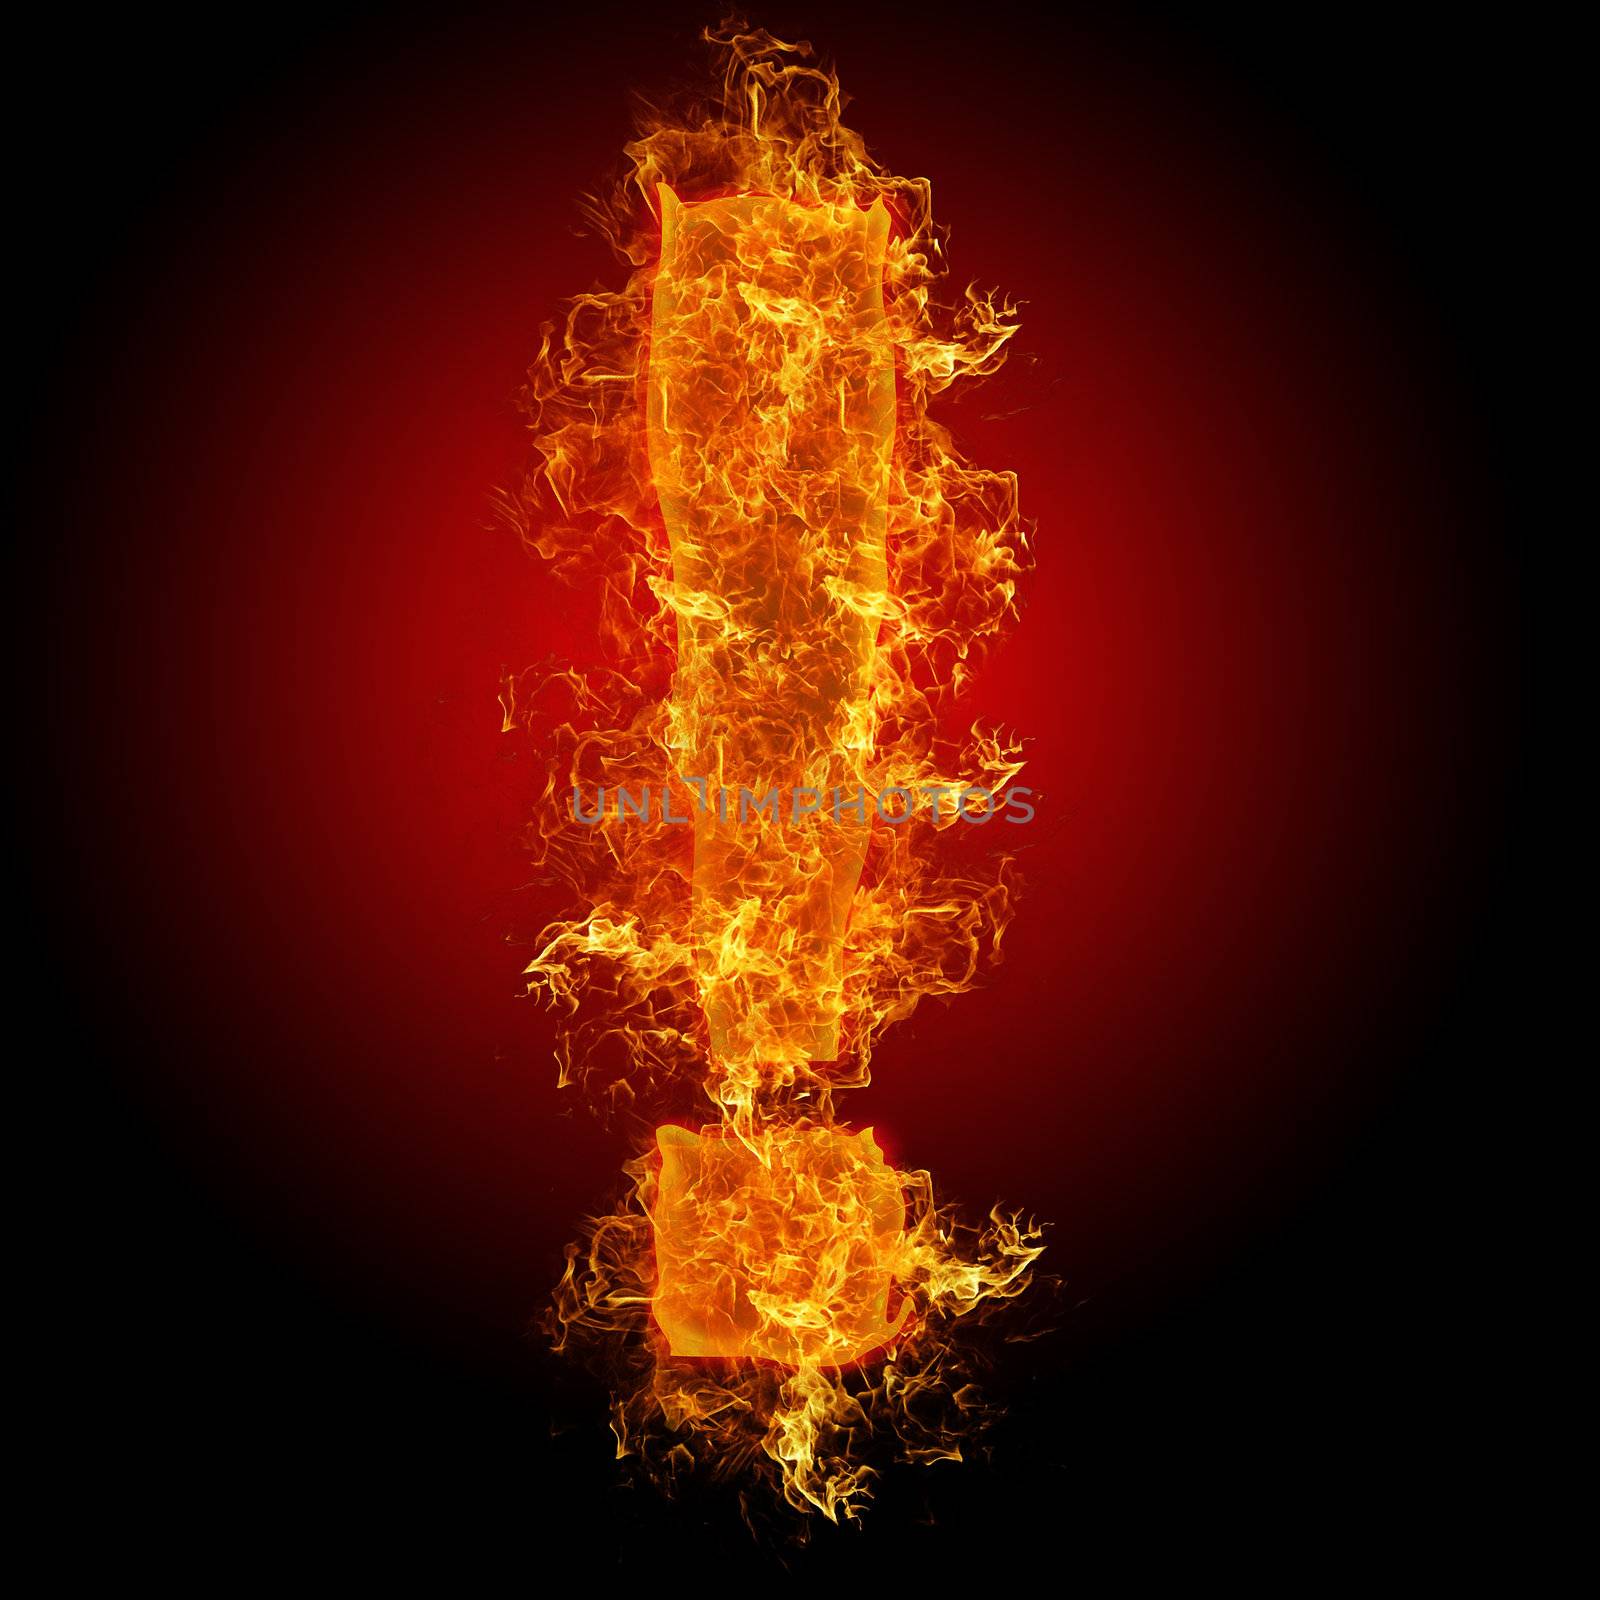 Fire sign exclamation mark on a black background